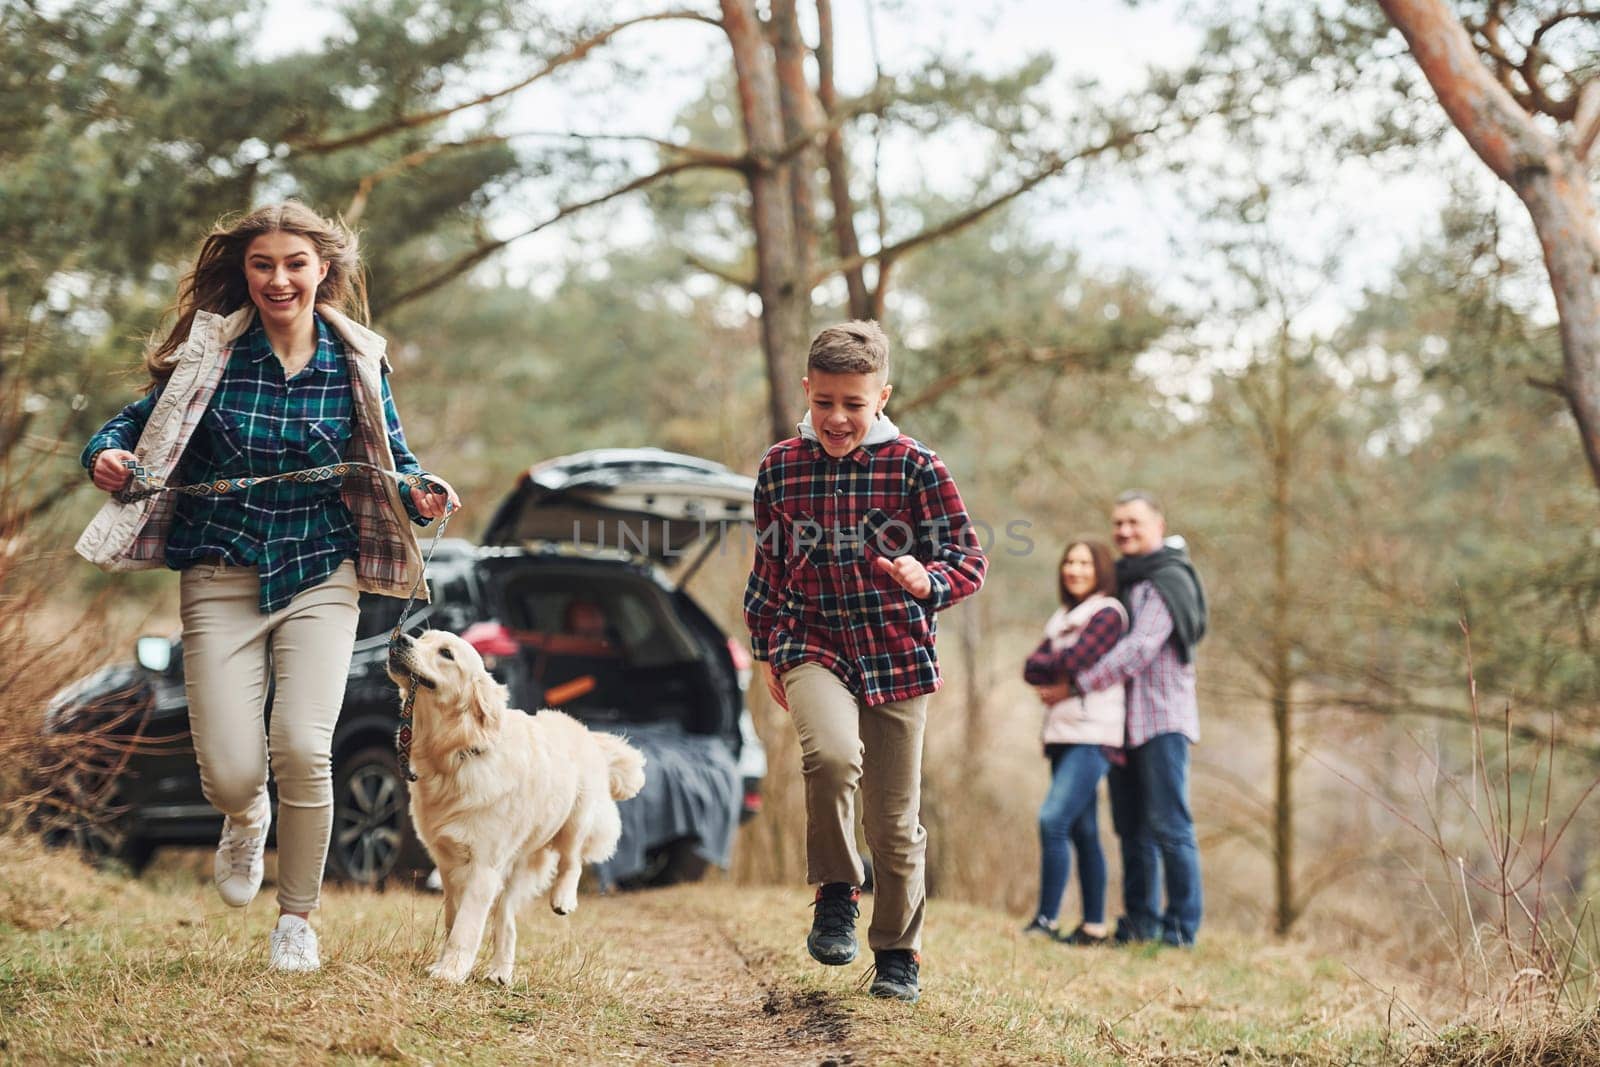 Sister and brother runs forward. Happy family have fun with their dog near modern car outdoors in forest by Standret